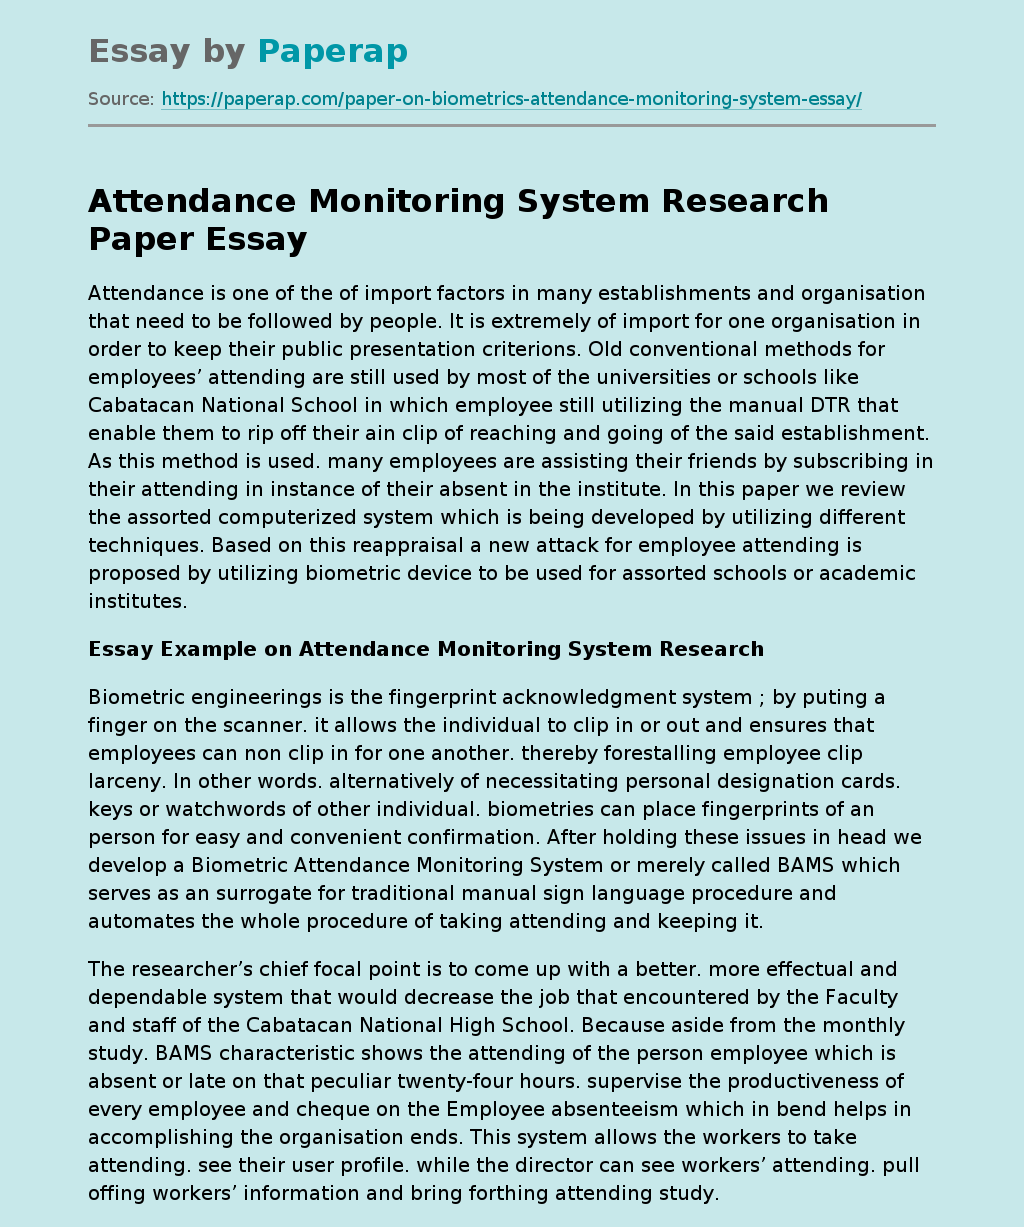 Attendance Monitoring System Research Paper